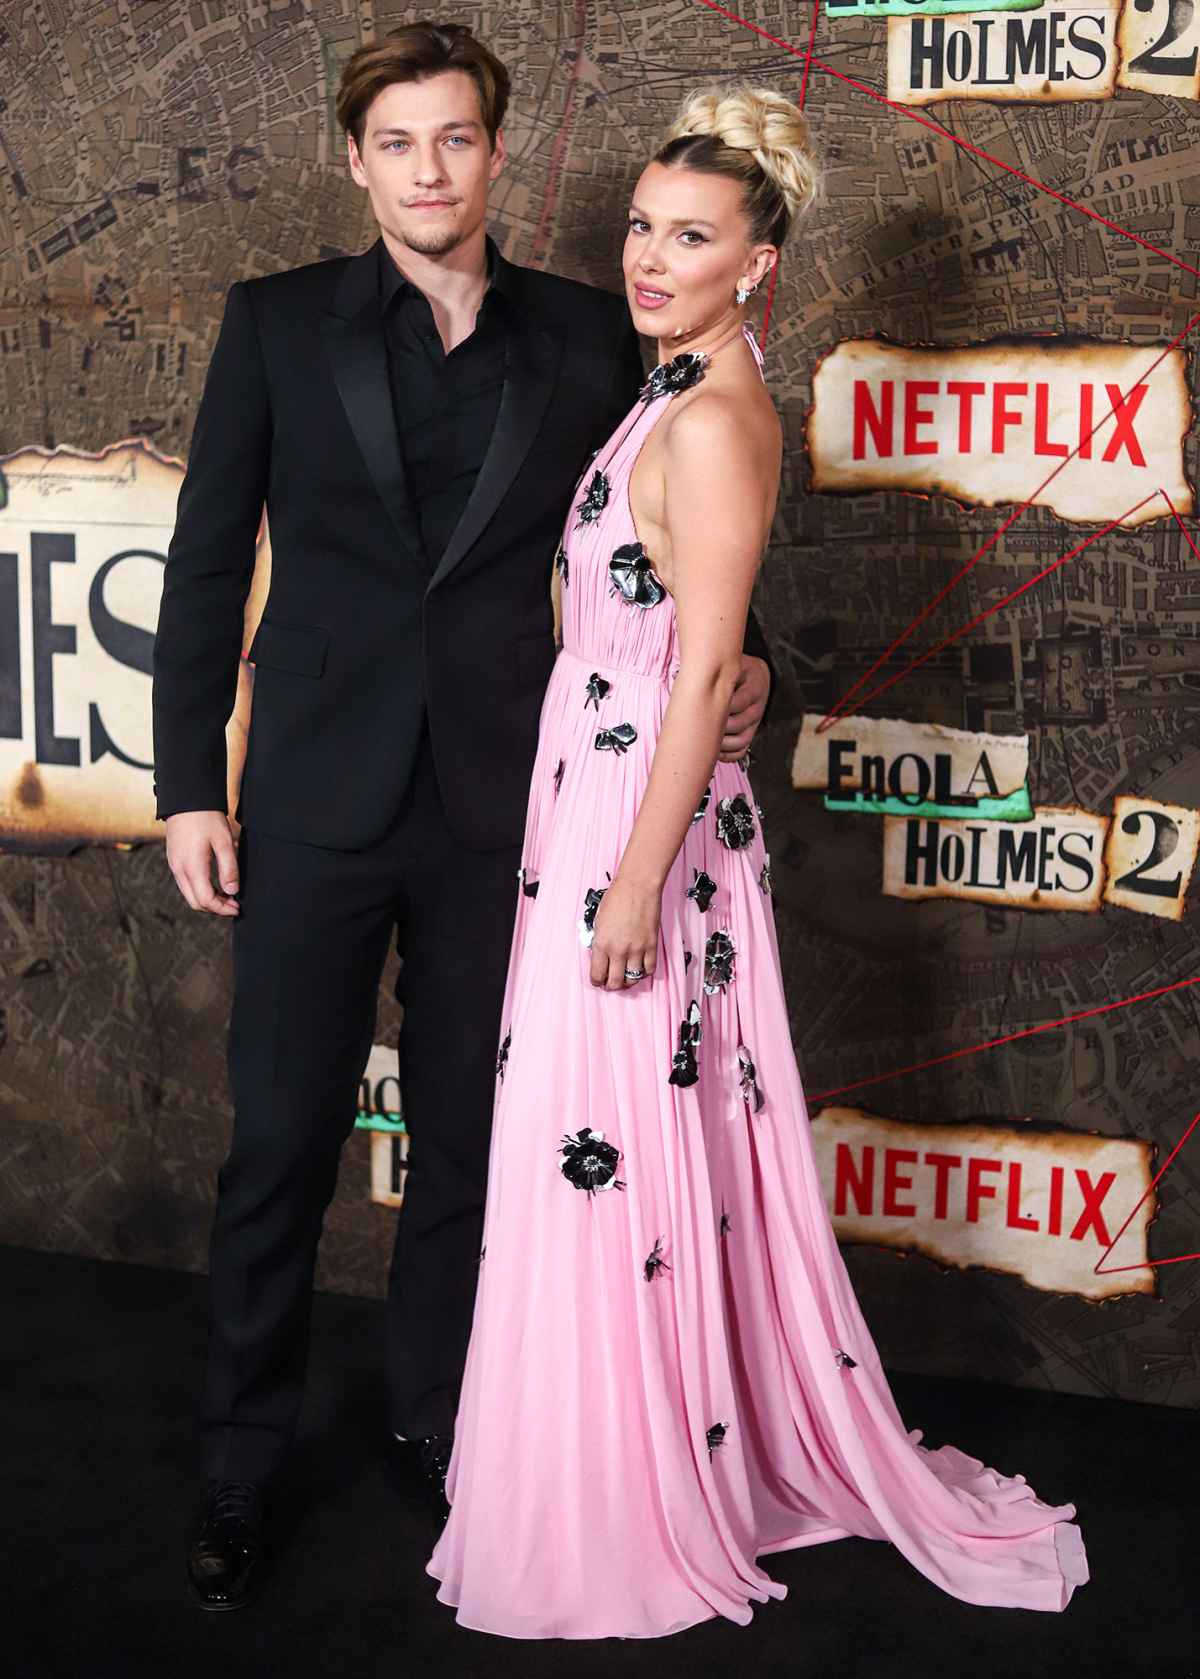 Millie Bobby Brown Chooses Sartorial Romance in Pink Louis Vuitton Dress  With 3D Floral Details for 'Enola Holmes 2′ Premiere